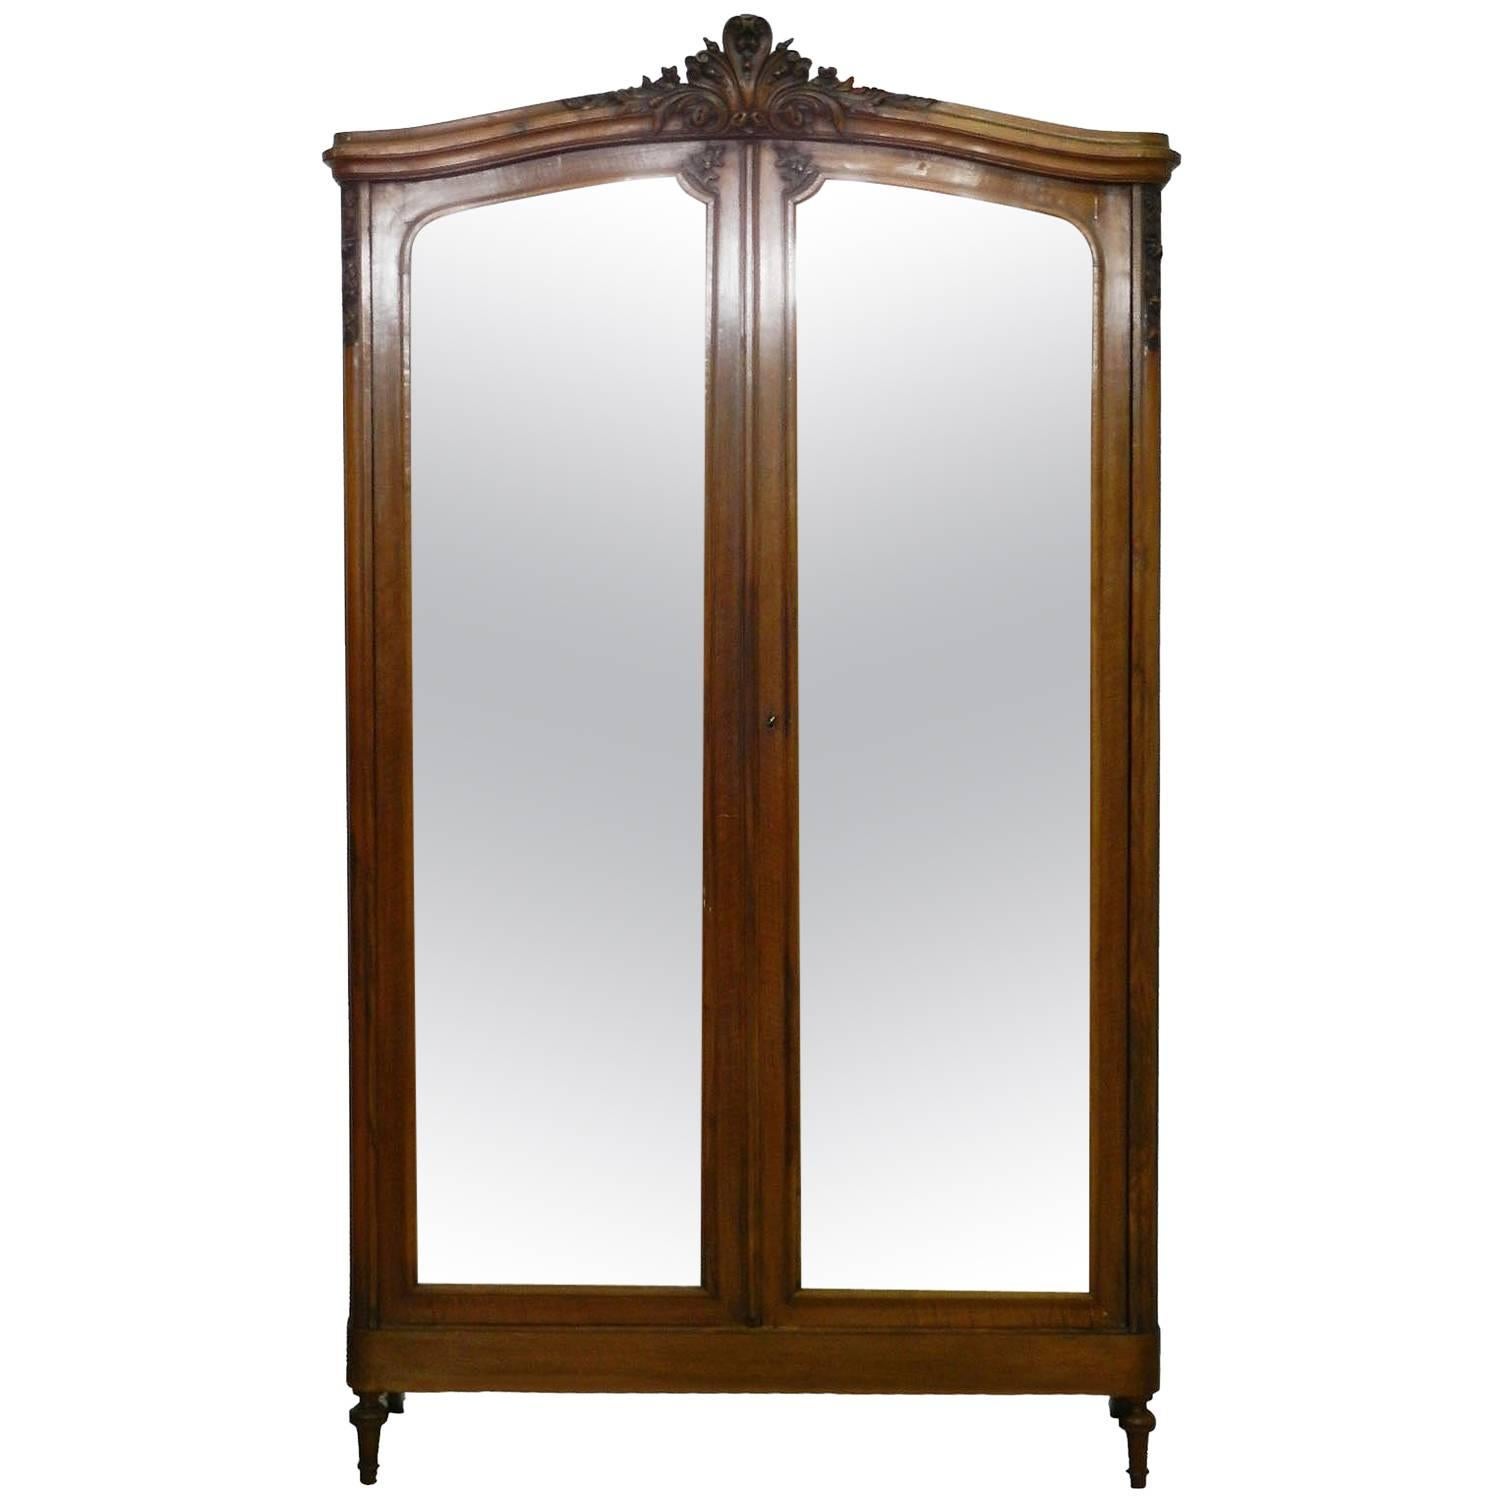 French Armoire Late 19th Century Louis Mirror Door Wardrobe Free Ship Option For Sale